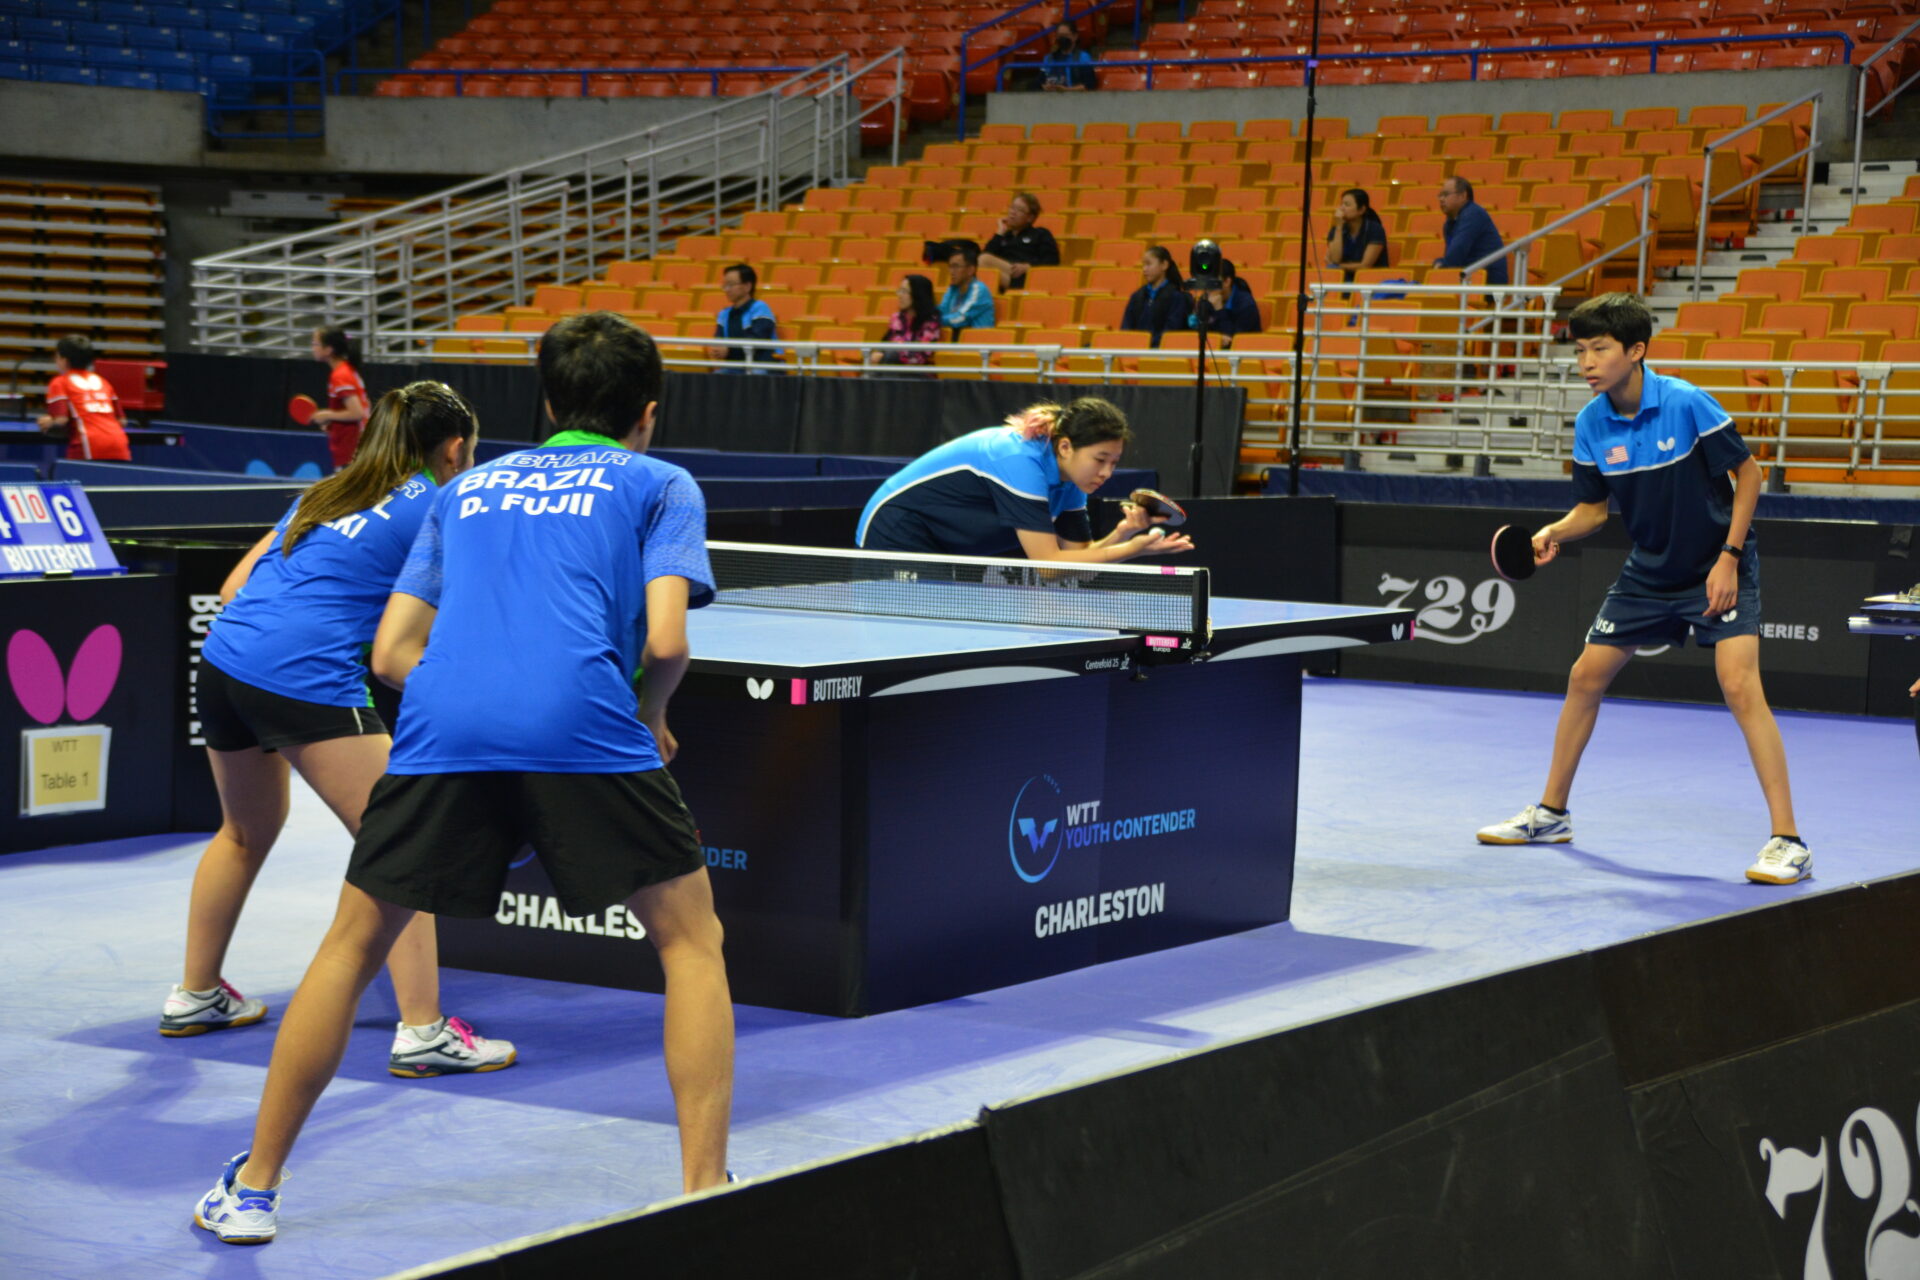 Young Table Tennis Players Learn To Focus Amidst The Racquet